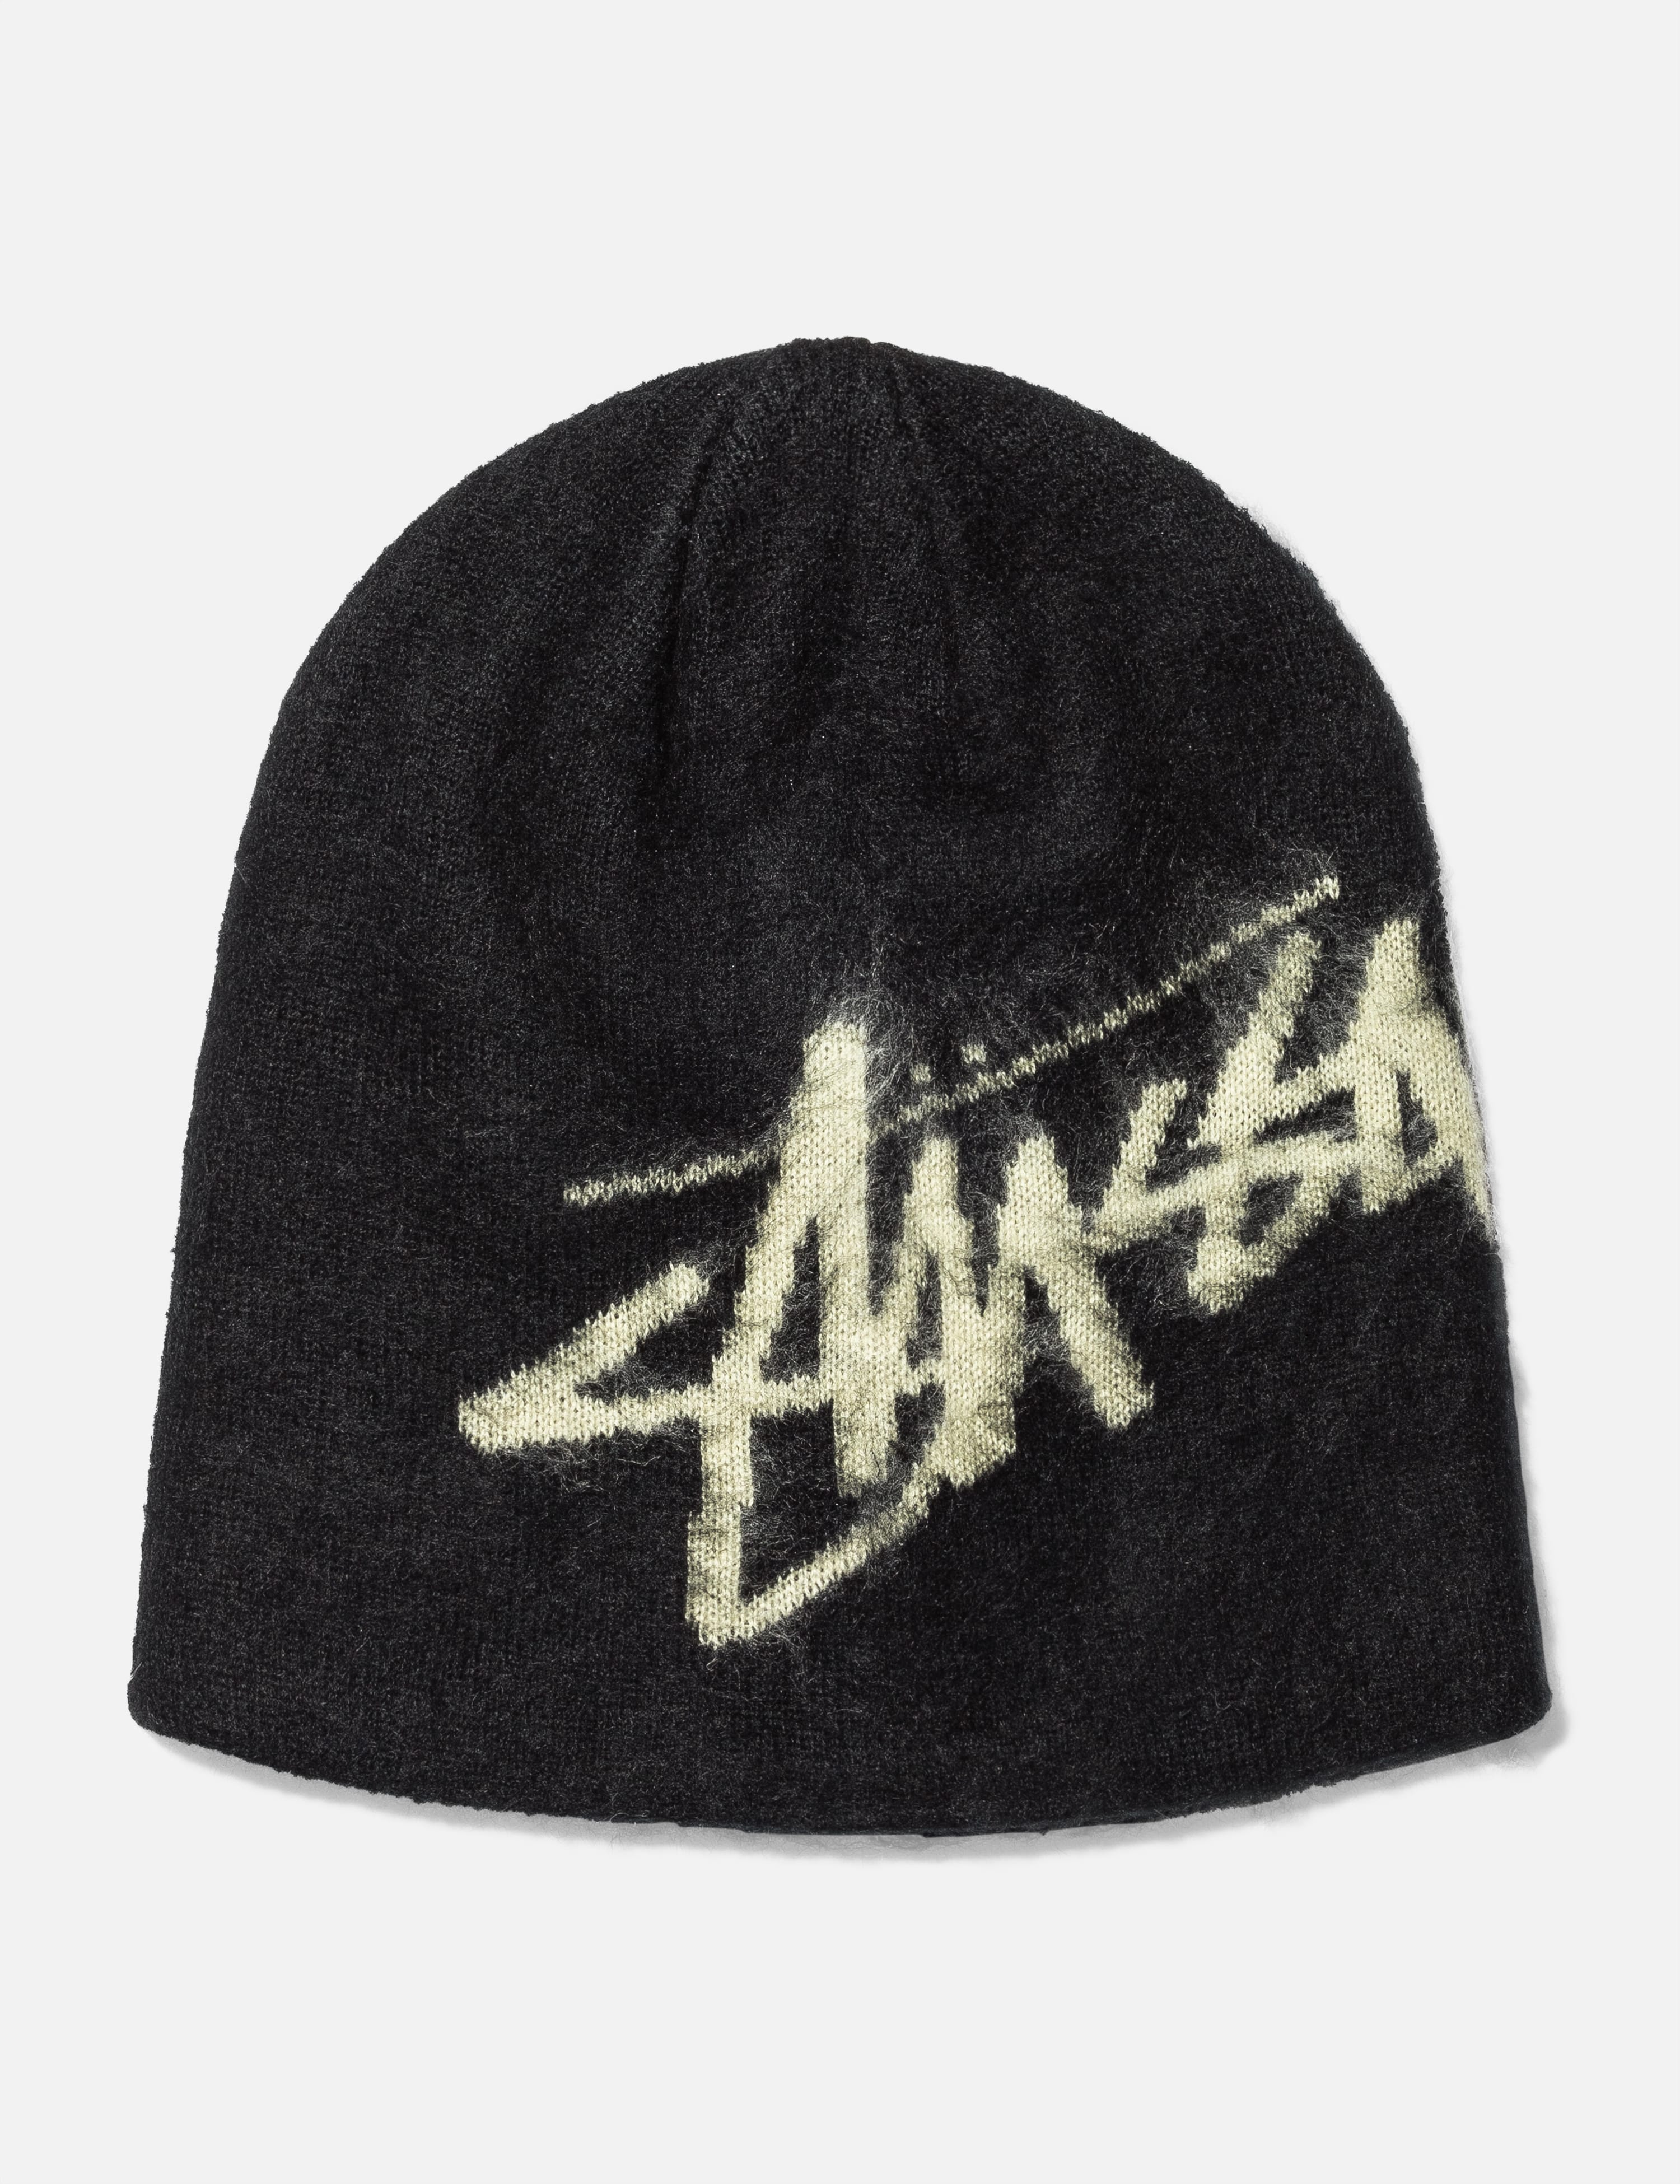 Stüssy - Skullcap Brushed Out Stock | HBX - Globally Curated